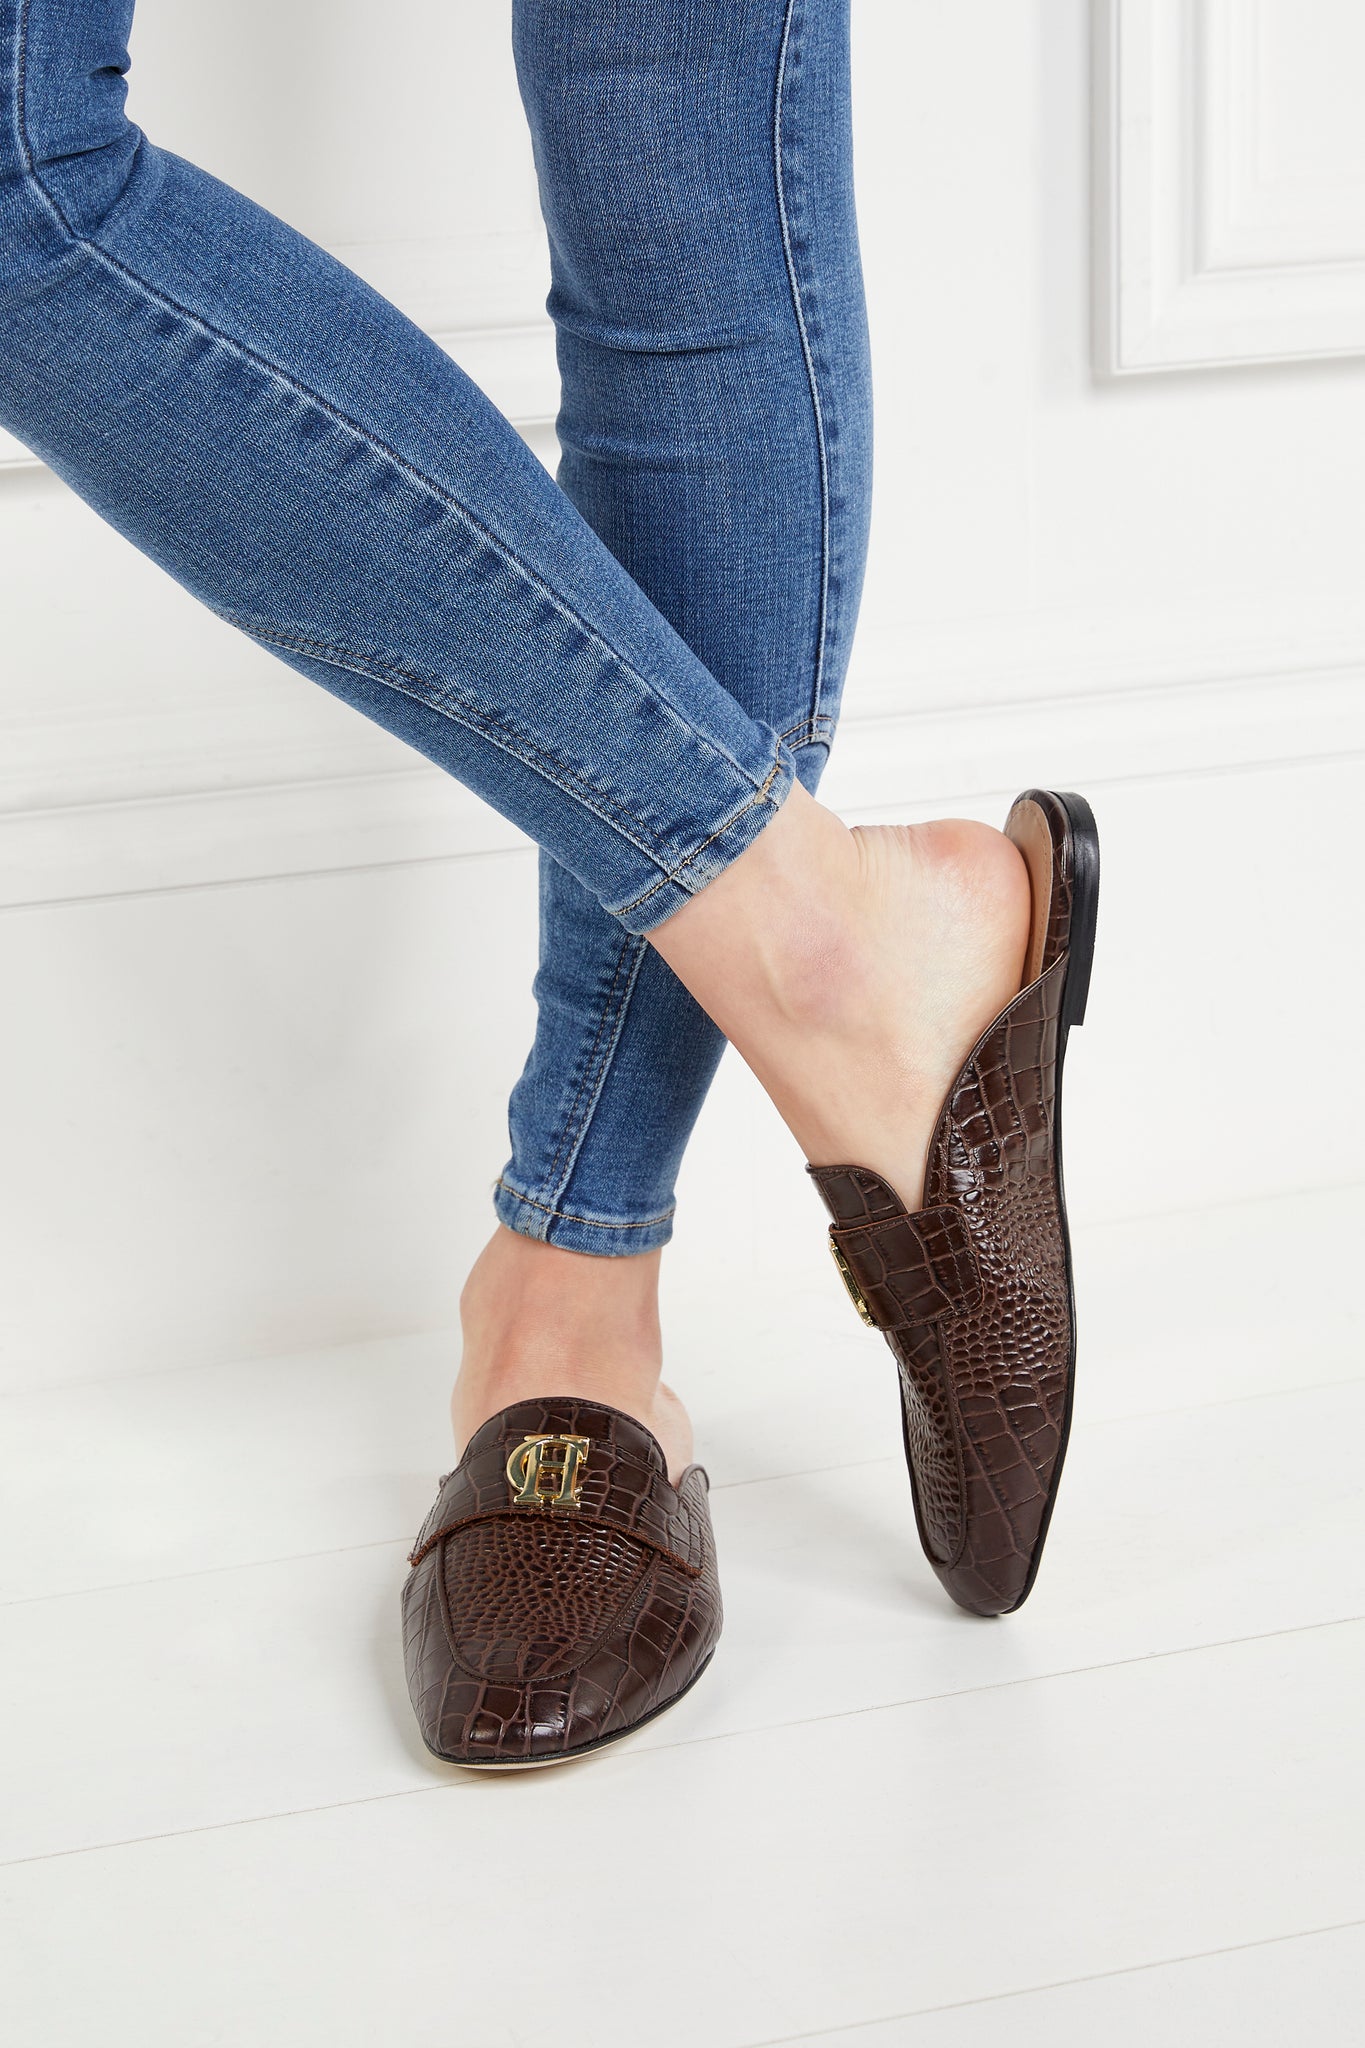 Brown croc embossed leather backless loafers with a slightly pointed toe and gold hardware to the top paired with denim skinny jeans